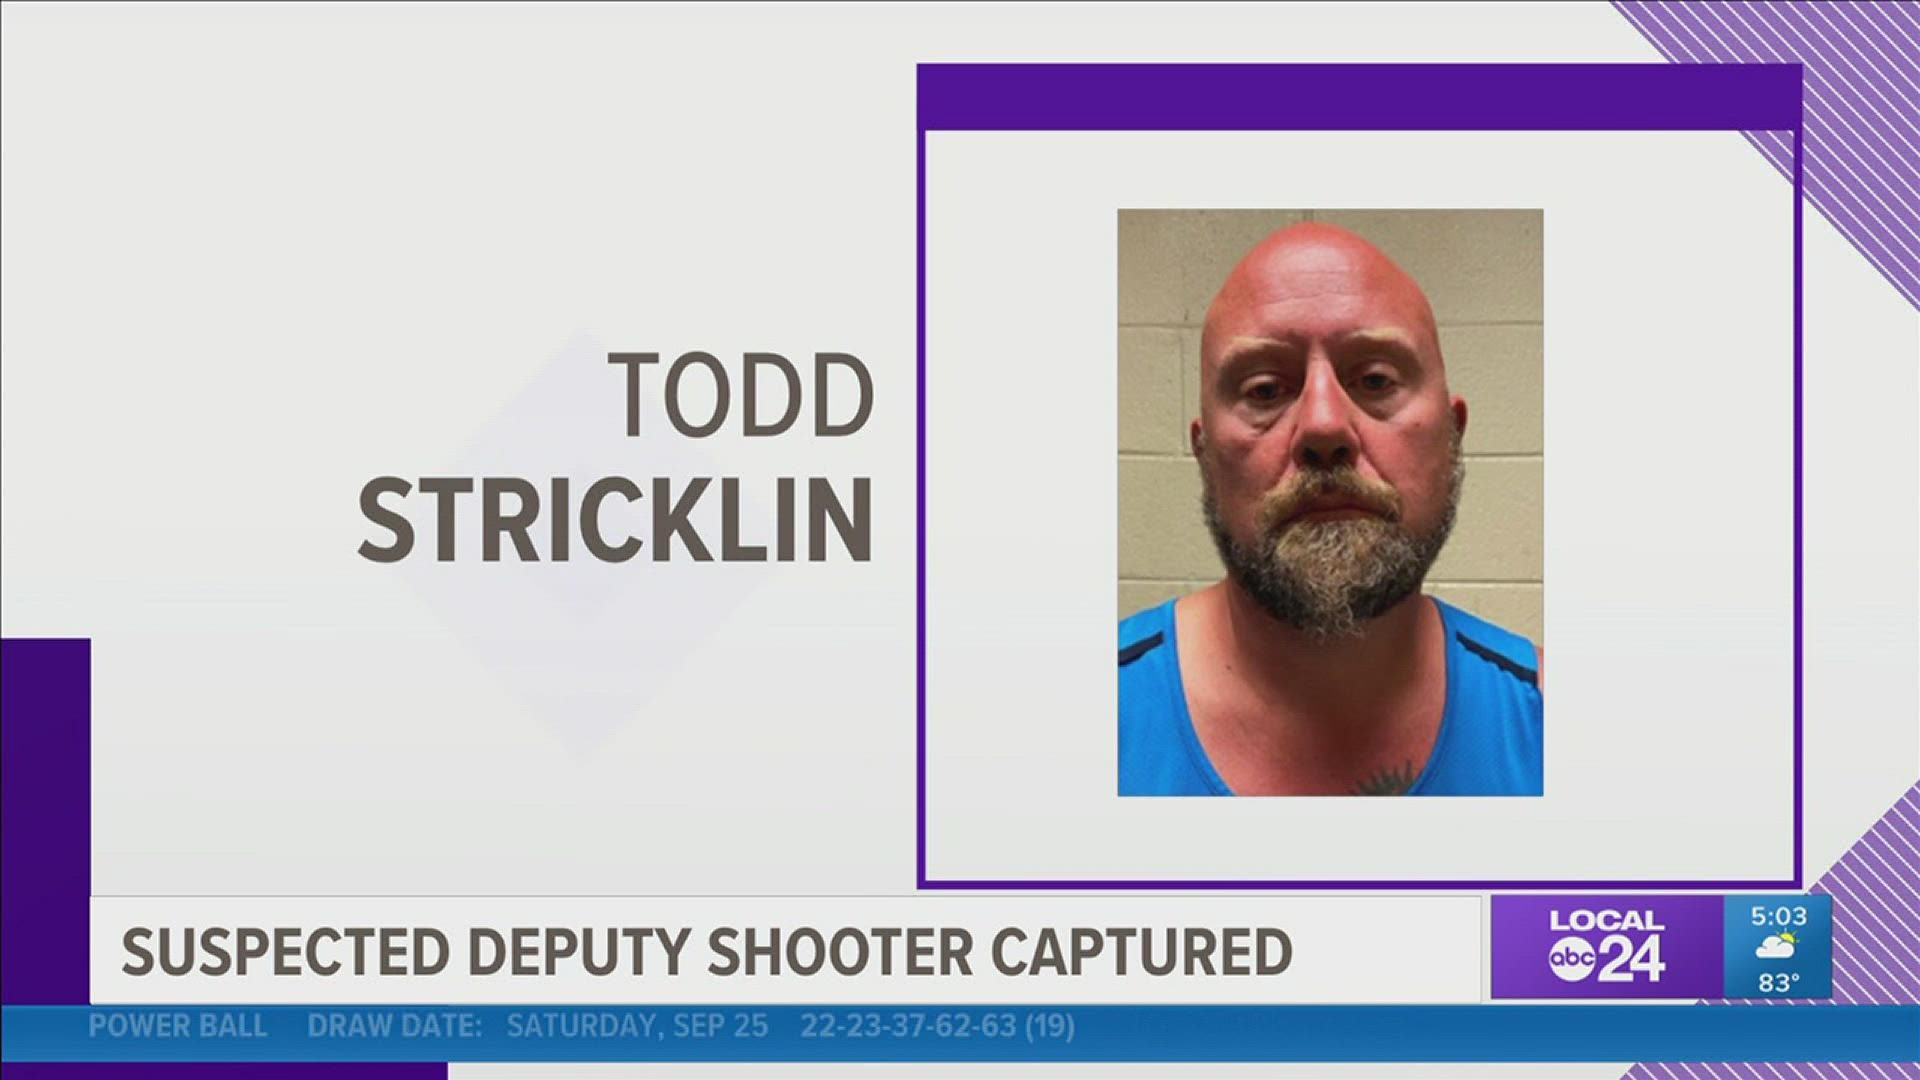 A man has been charged with shooting and killing a deputy in Tennessee on Saturday, according to the TBI.